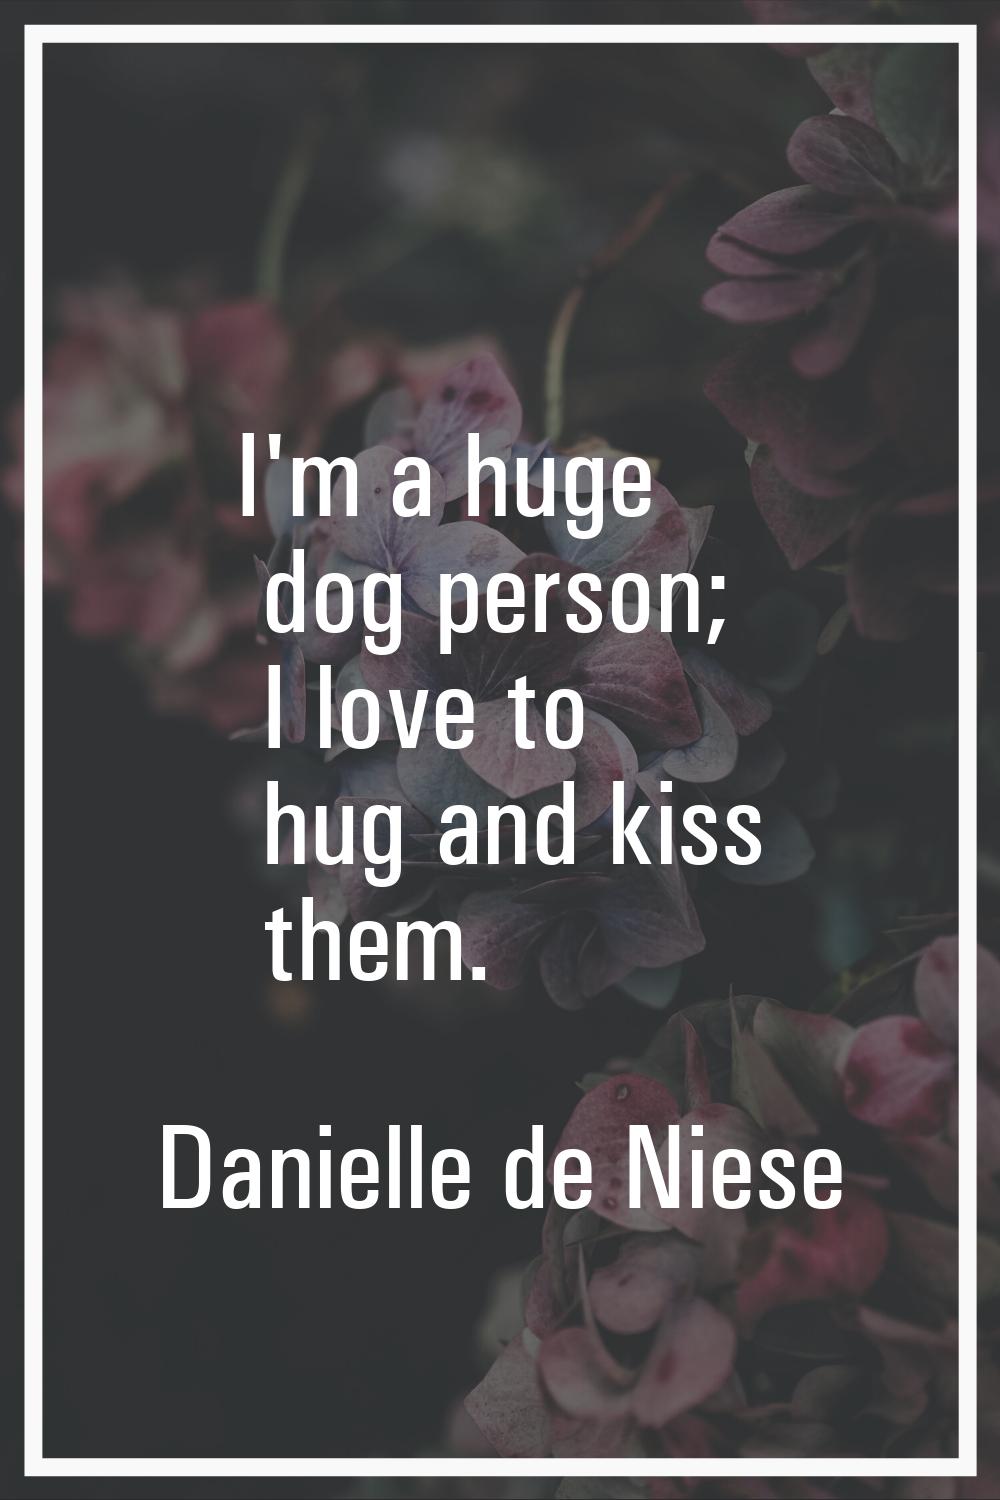 I'm a huge dog person; I love to hug and kiss them.